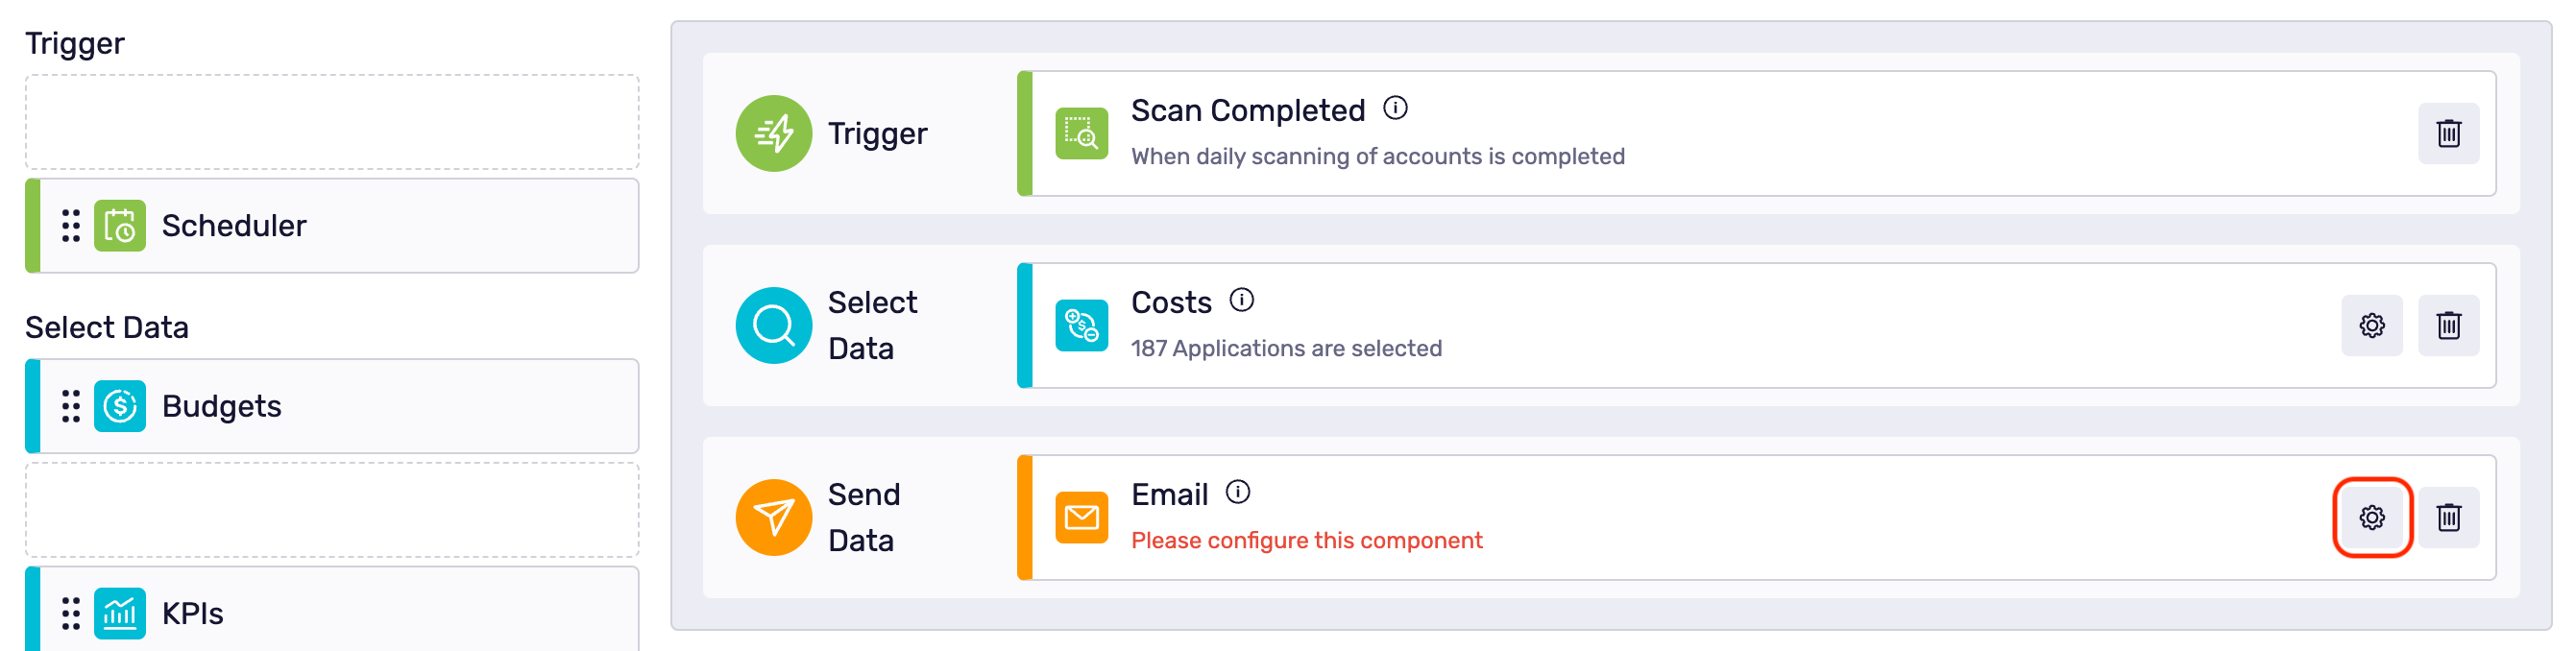 cost-email-icon